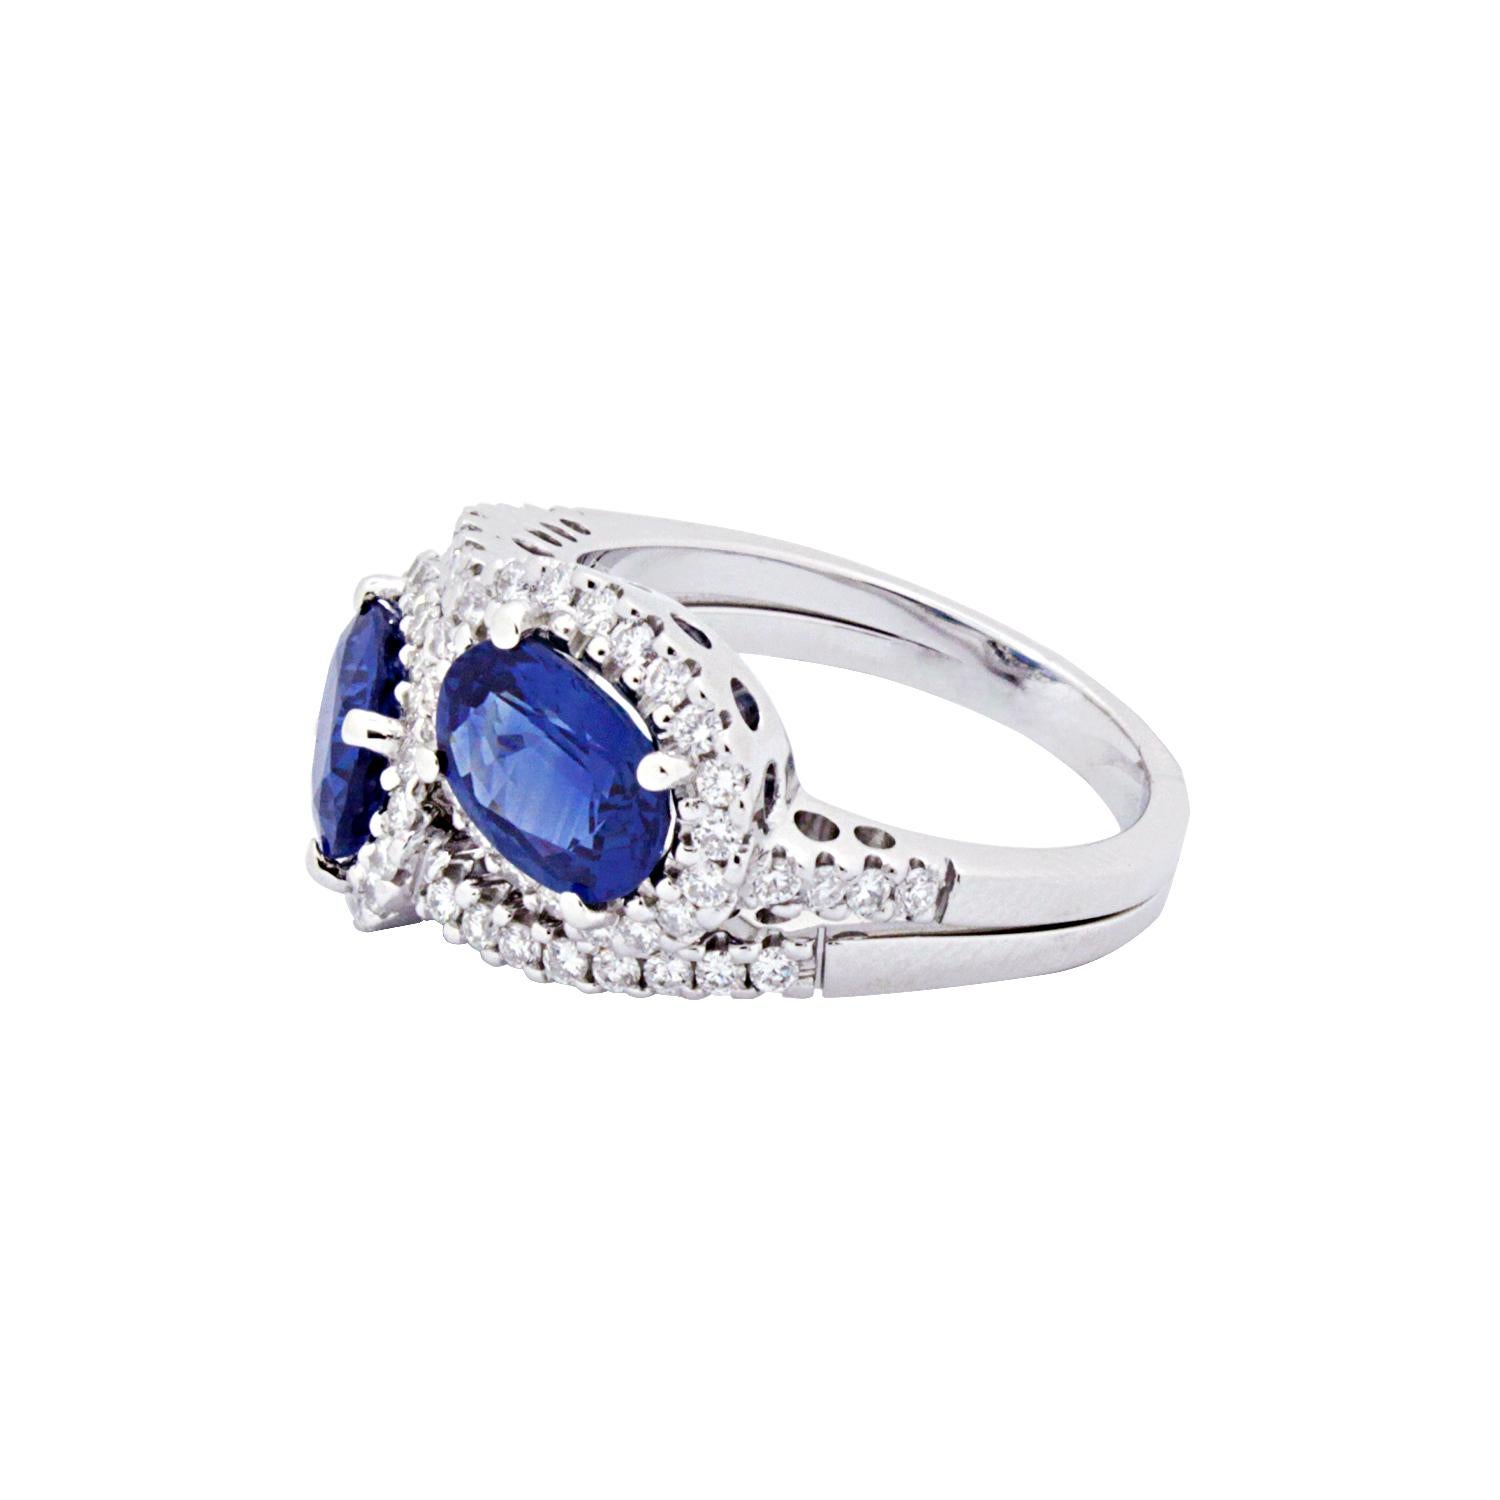 18 Karat White Gold Brilliant Cut Diamond and Sapphire Engagement Ring
A ring fit for royalty.
Description of Gemstones –
White Brilliant Cut Diamonds, total carat weight – 0.70ct ‘F’ Colour ‘VVS1’ Clarity
Sapphire, total carat weight - 3.86ct
